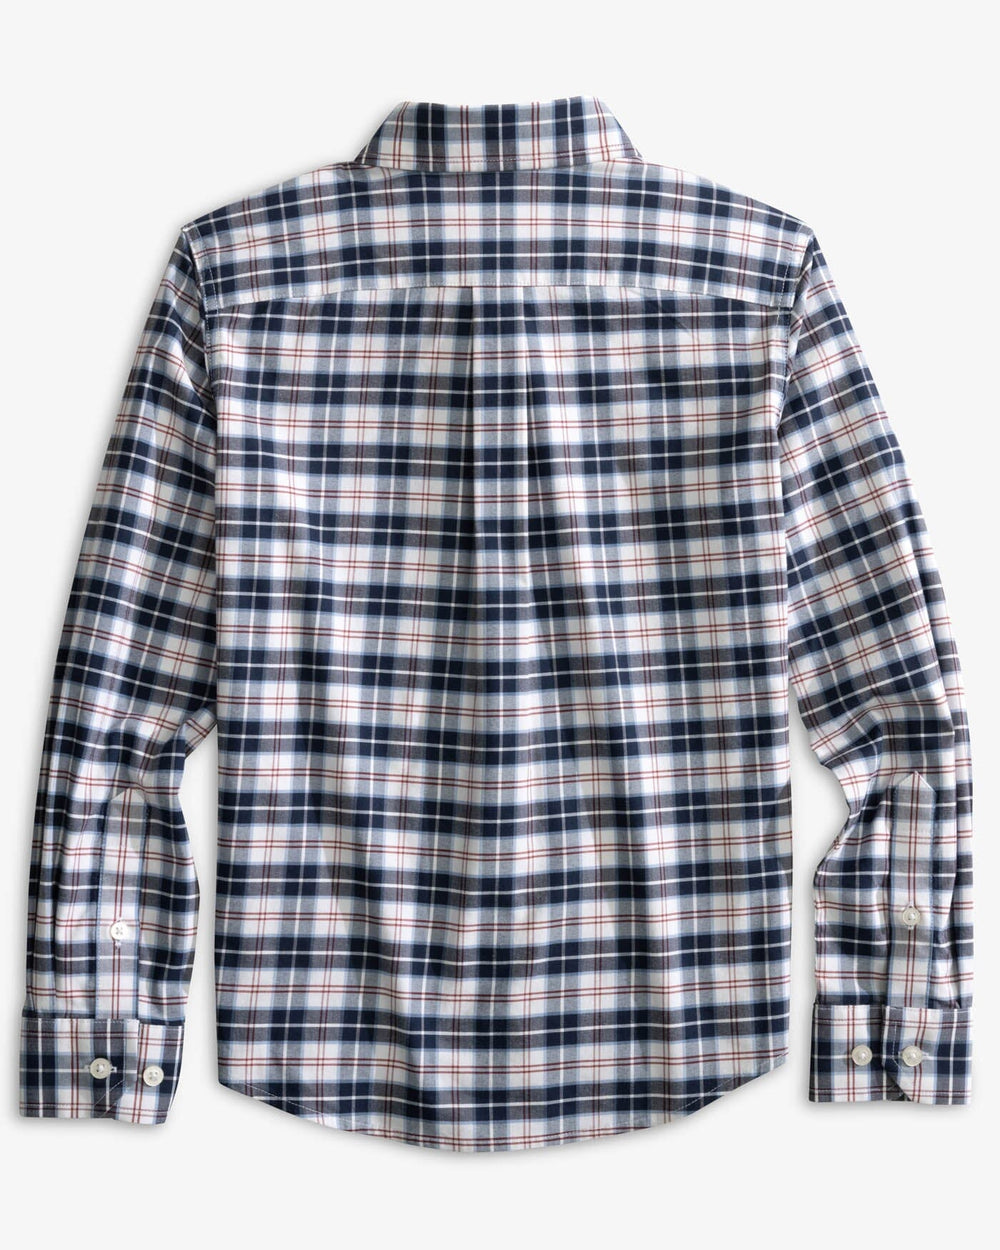 The back view of the Southern Tide Boys Coastal Passage Dearview Plaid Long Sleeve Sportshirt by Southern Tide - Dress Blue